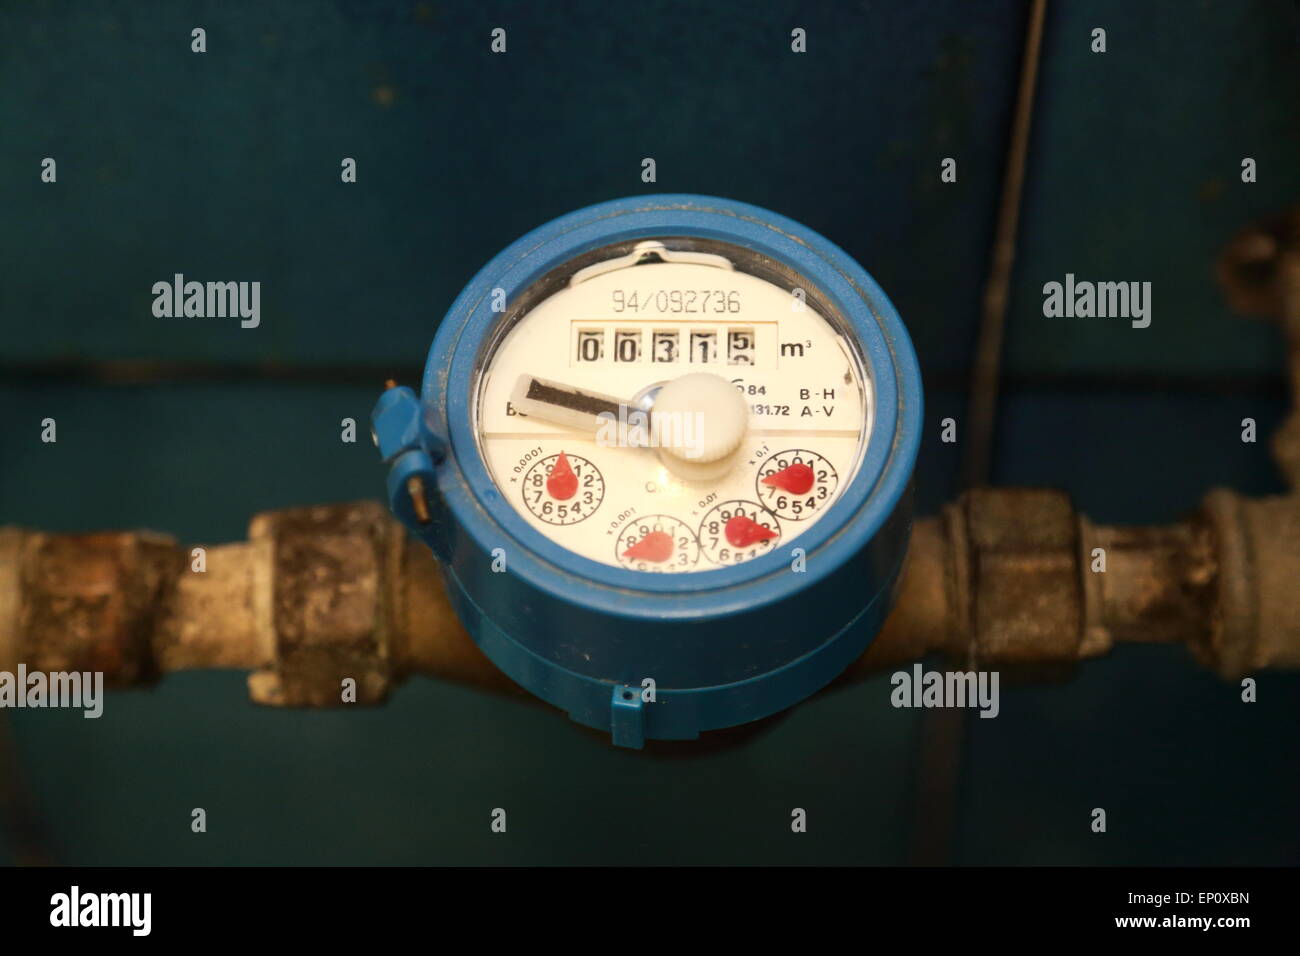 Water Meter Reading High Resolution Stock Photography and Images - Alamy